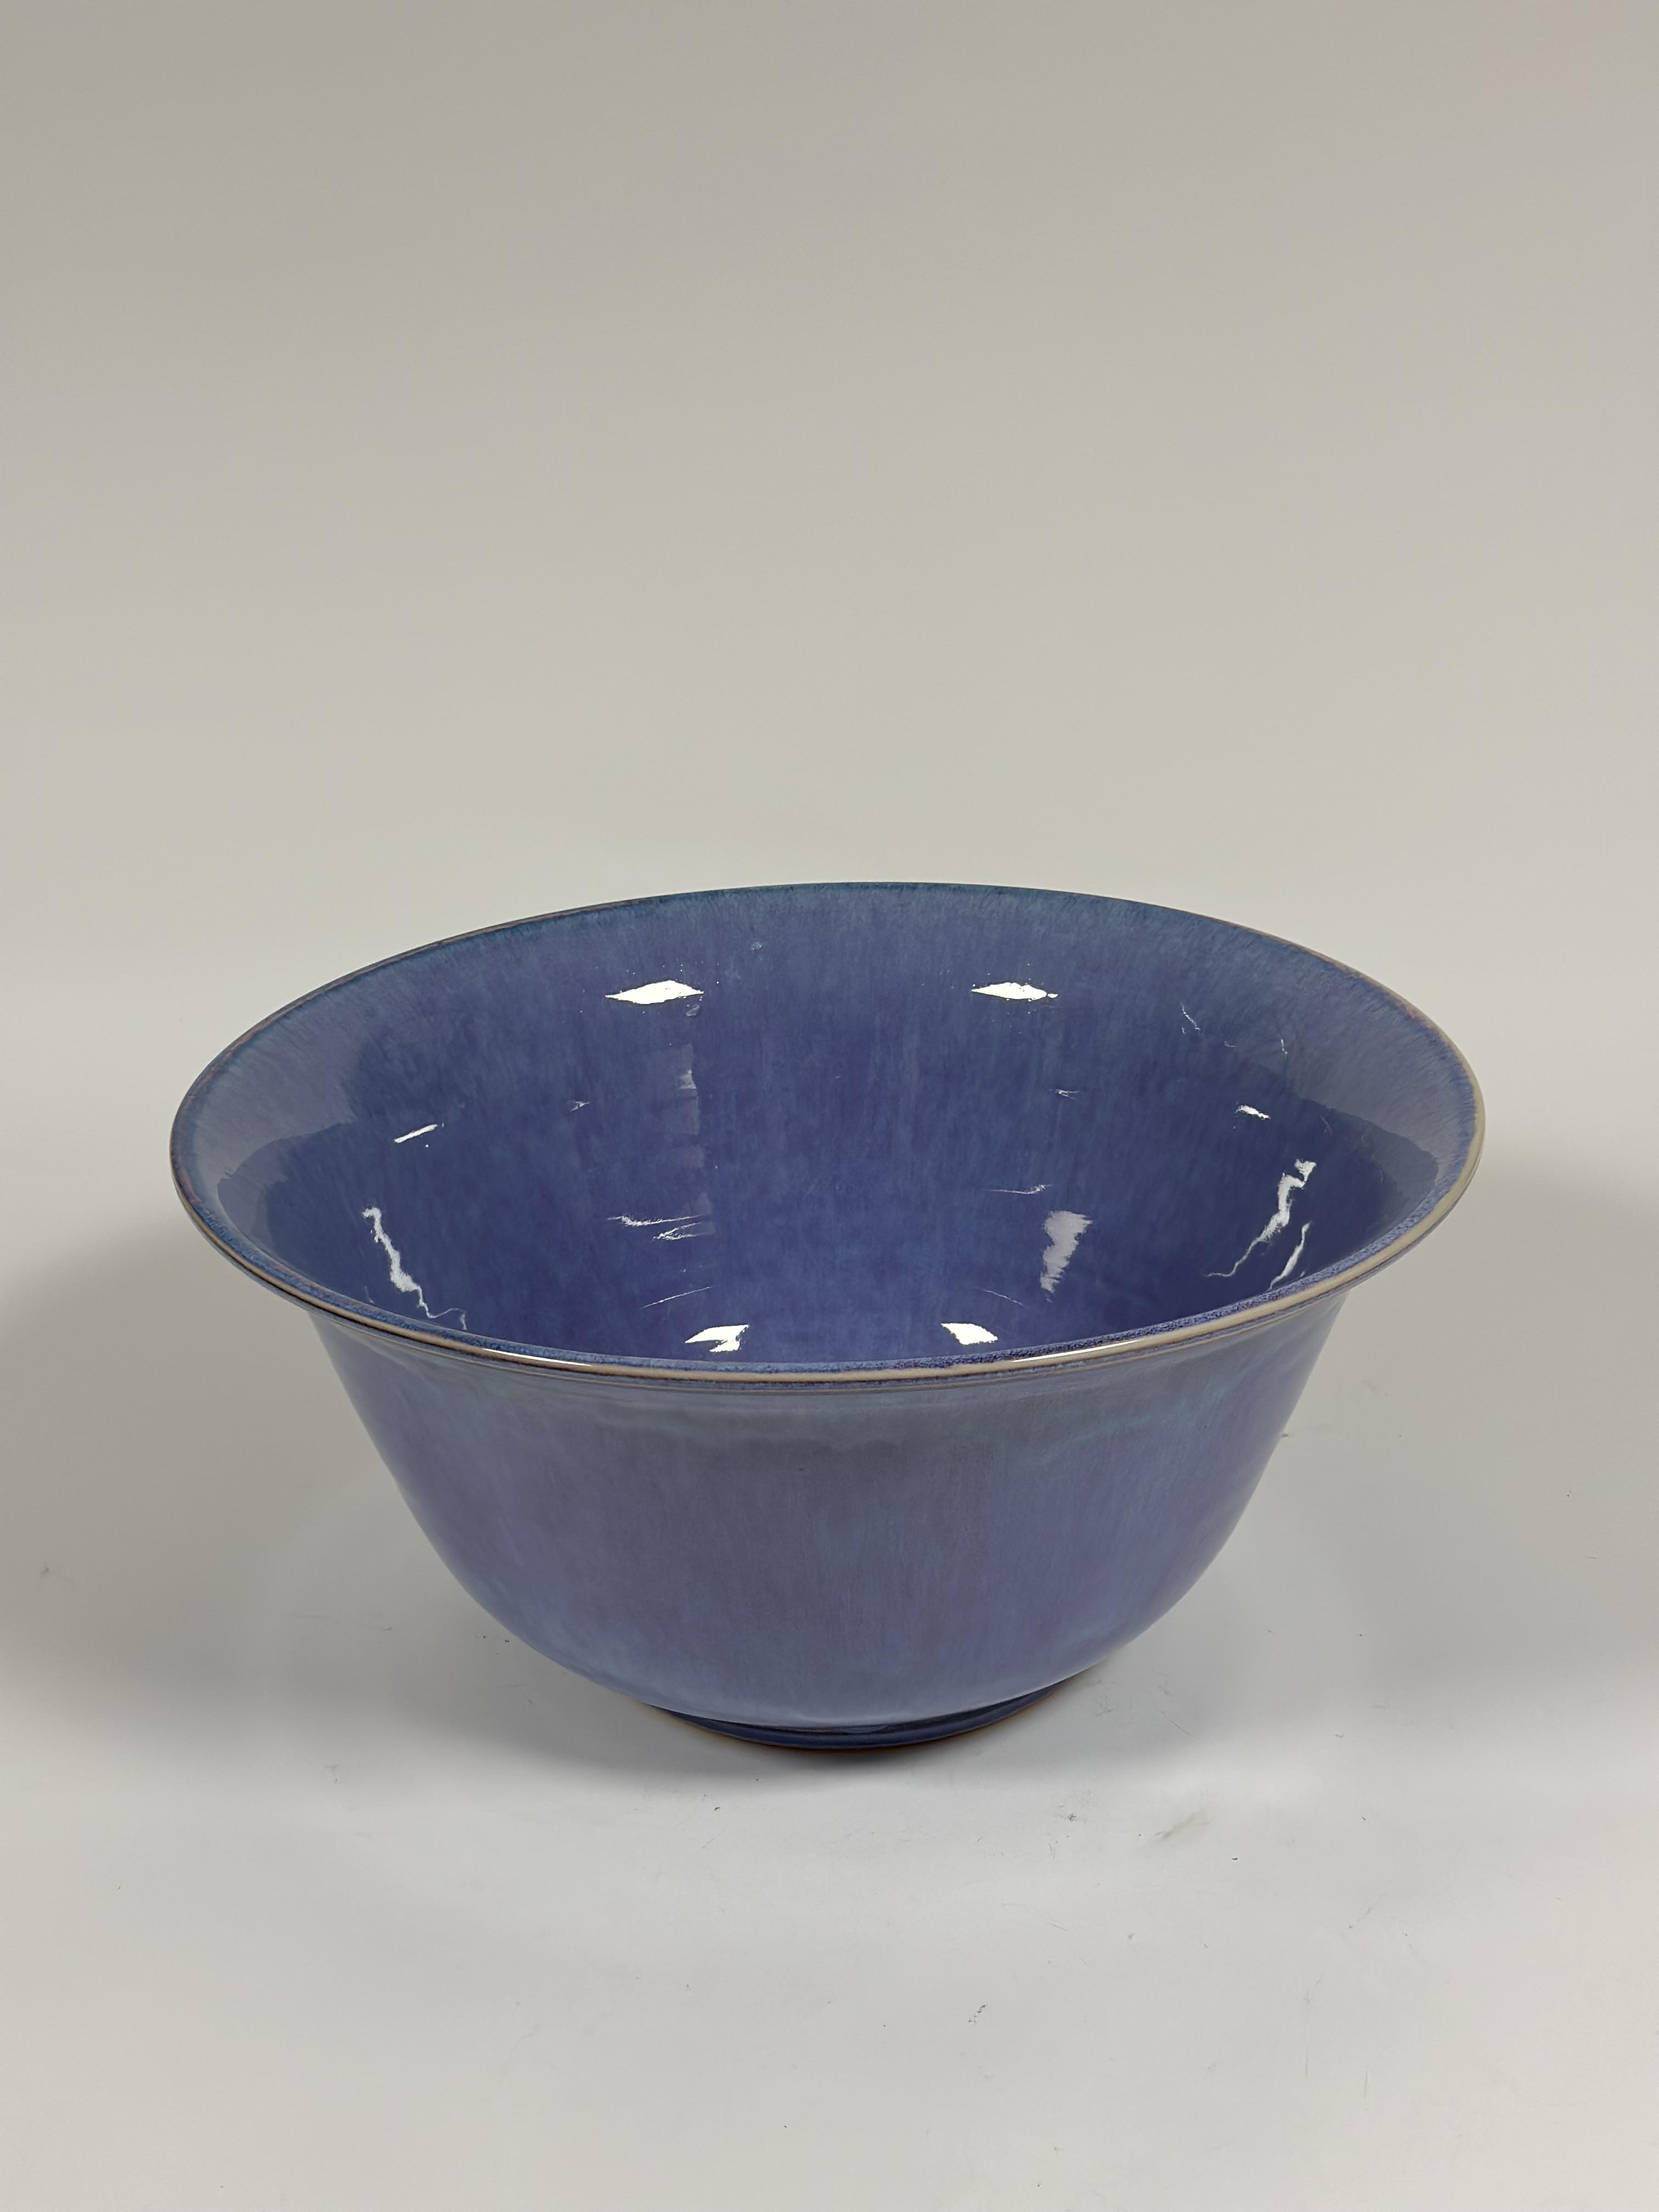 A large Chinese monochrome lavender glazed bowl or basin, with mottled glaze, unmarked. 20cm by 42.